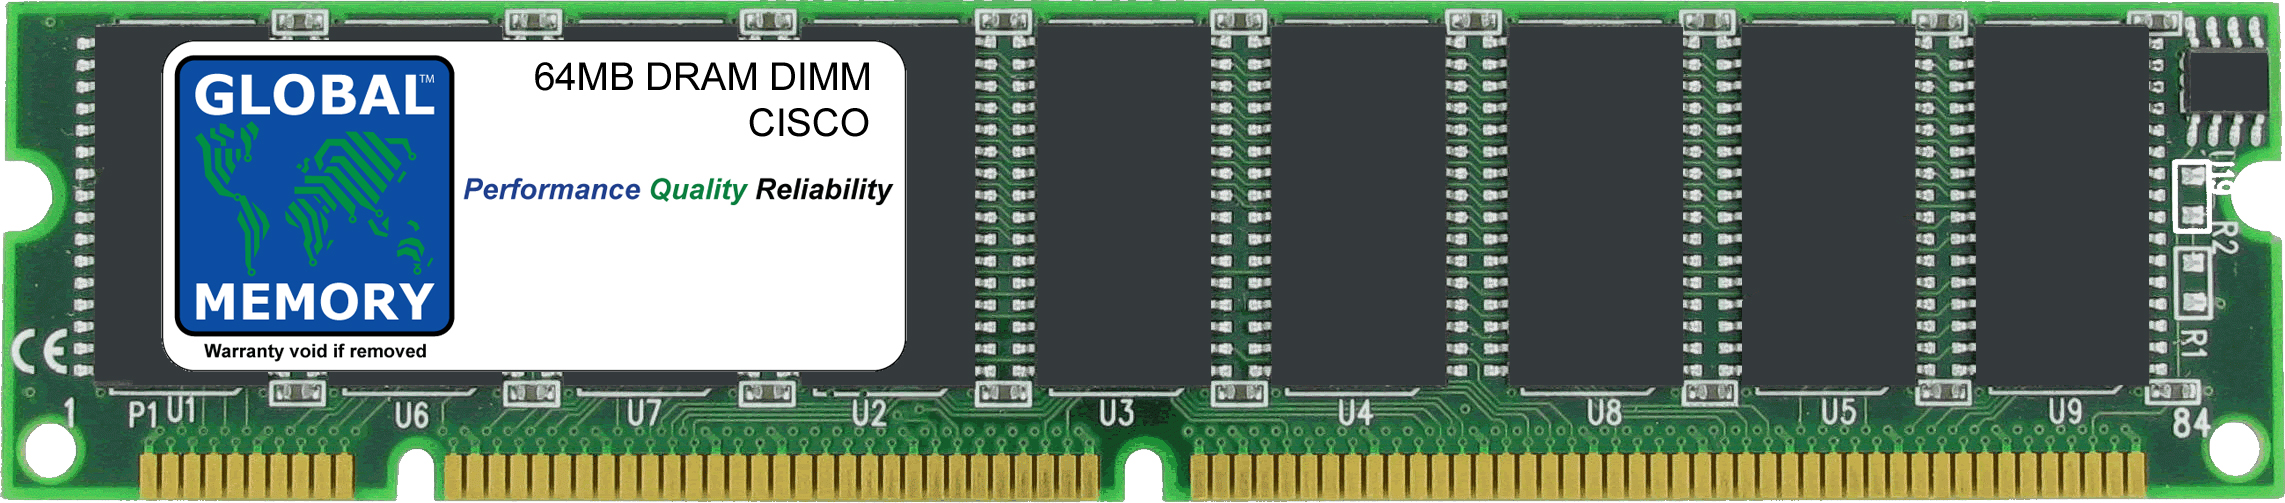 64MB DRAM DIMM MEMORY RAM FOR CISCO 7200 SERIES ROUTERS NPE-175 / 225 / 300 & NSE-1 / 1-7206 VXR (MEM-SD-NPE-64MB) - Click Image to Close